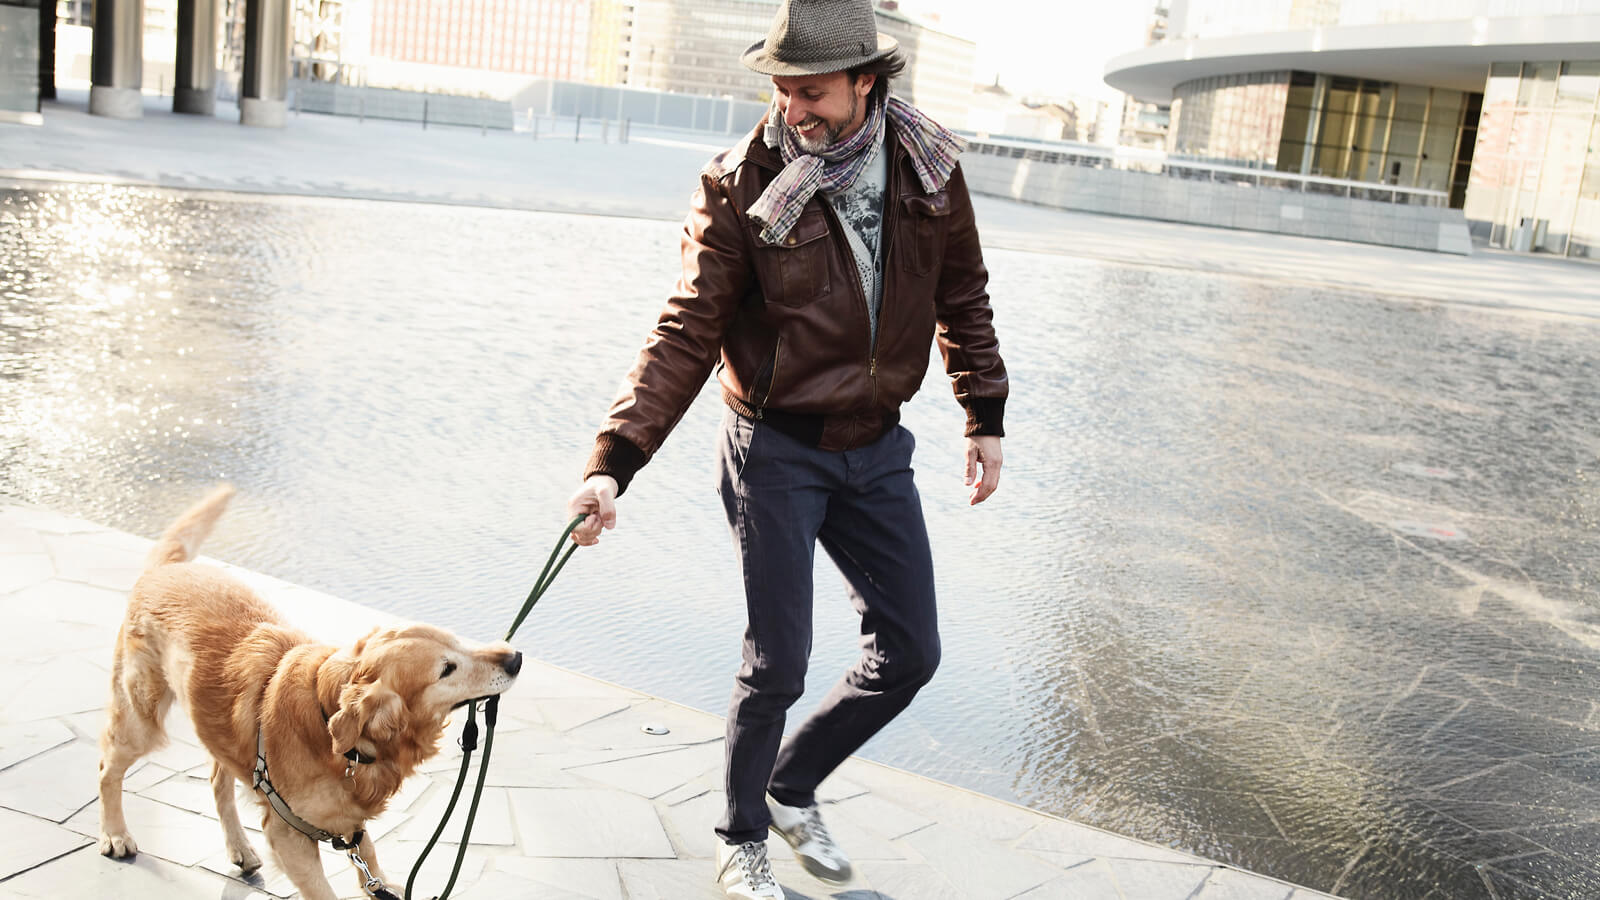 A man walks his dog who playfully tugs at its leash.